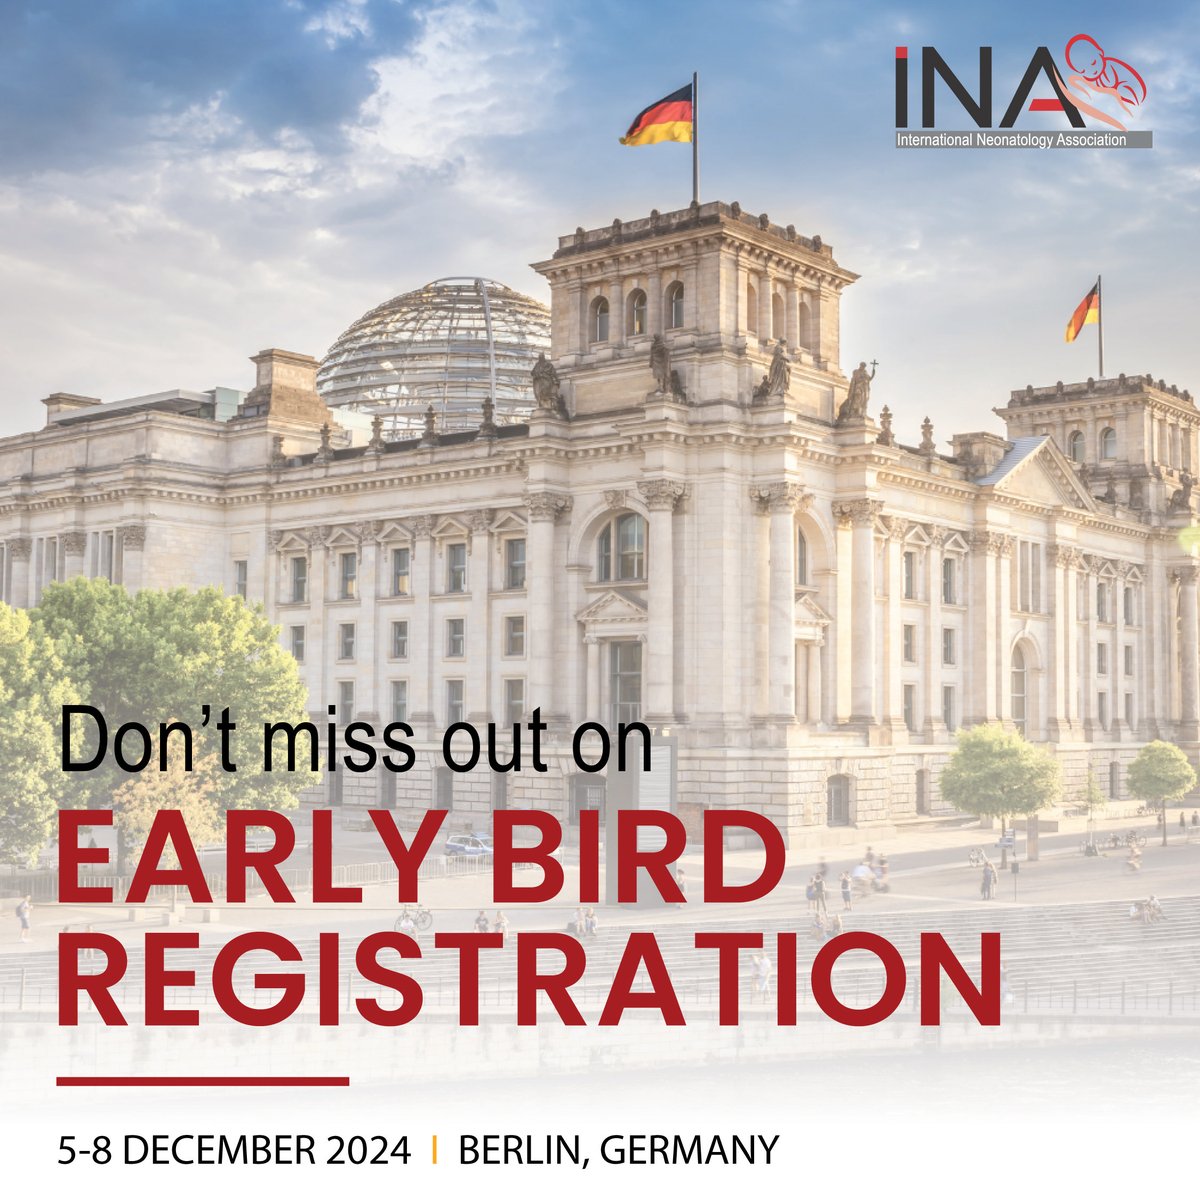 Don't Miss Out! The Early bird registration deadline for the 9th International Neonatology Association Conference (INAC 2024) is the 1st of July 2024! 🐦 Secure your spot today and take advantage of discounted rates. Join us in Berlin for an enriching experience in neonatology.